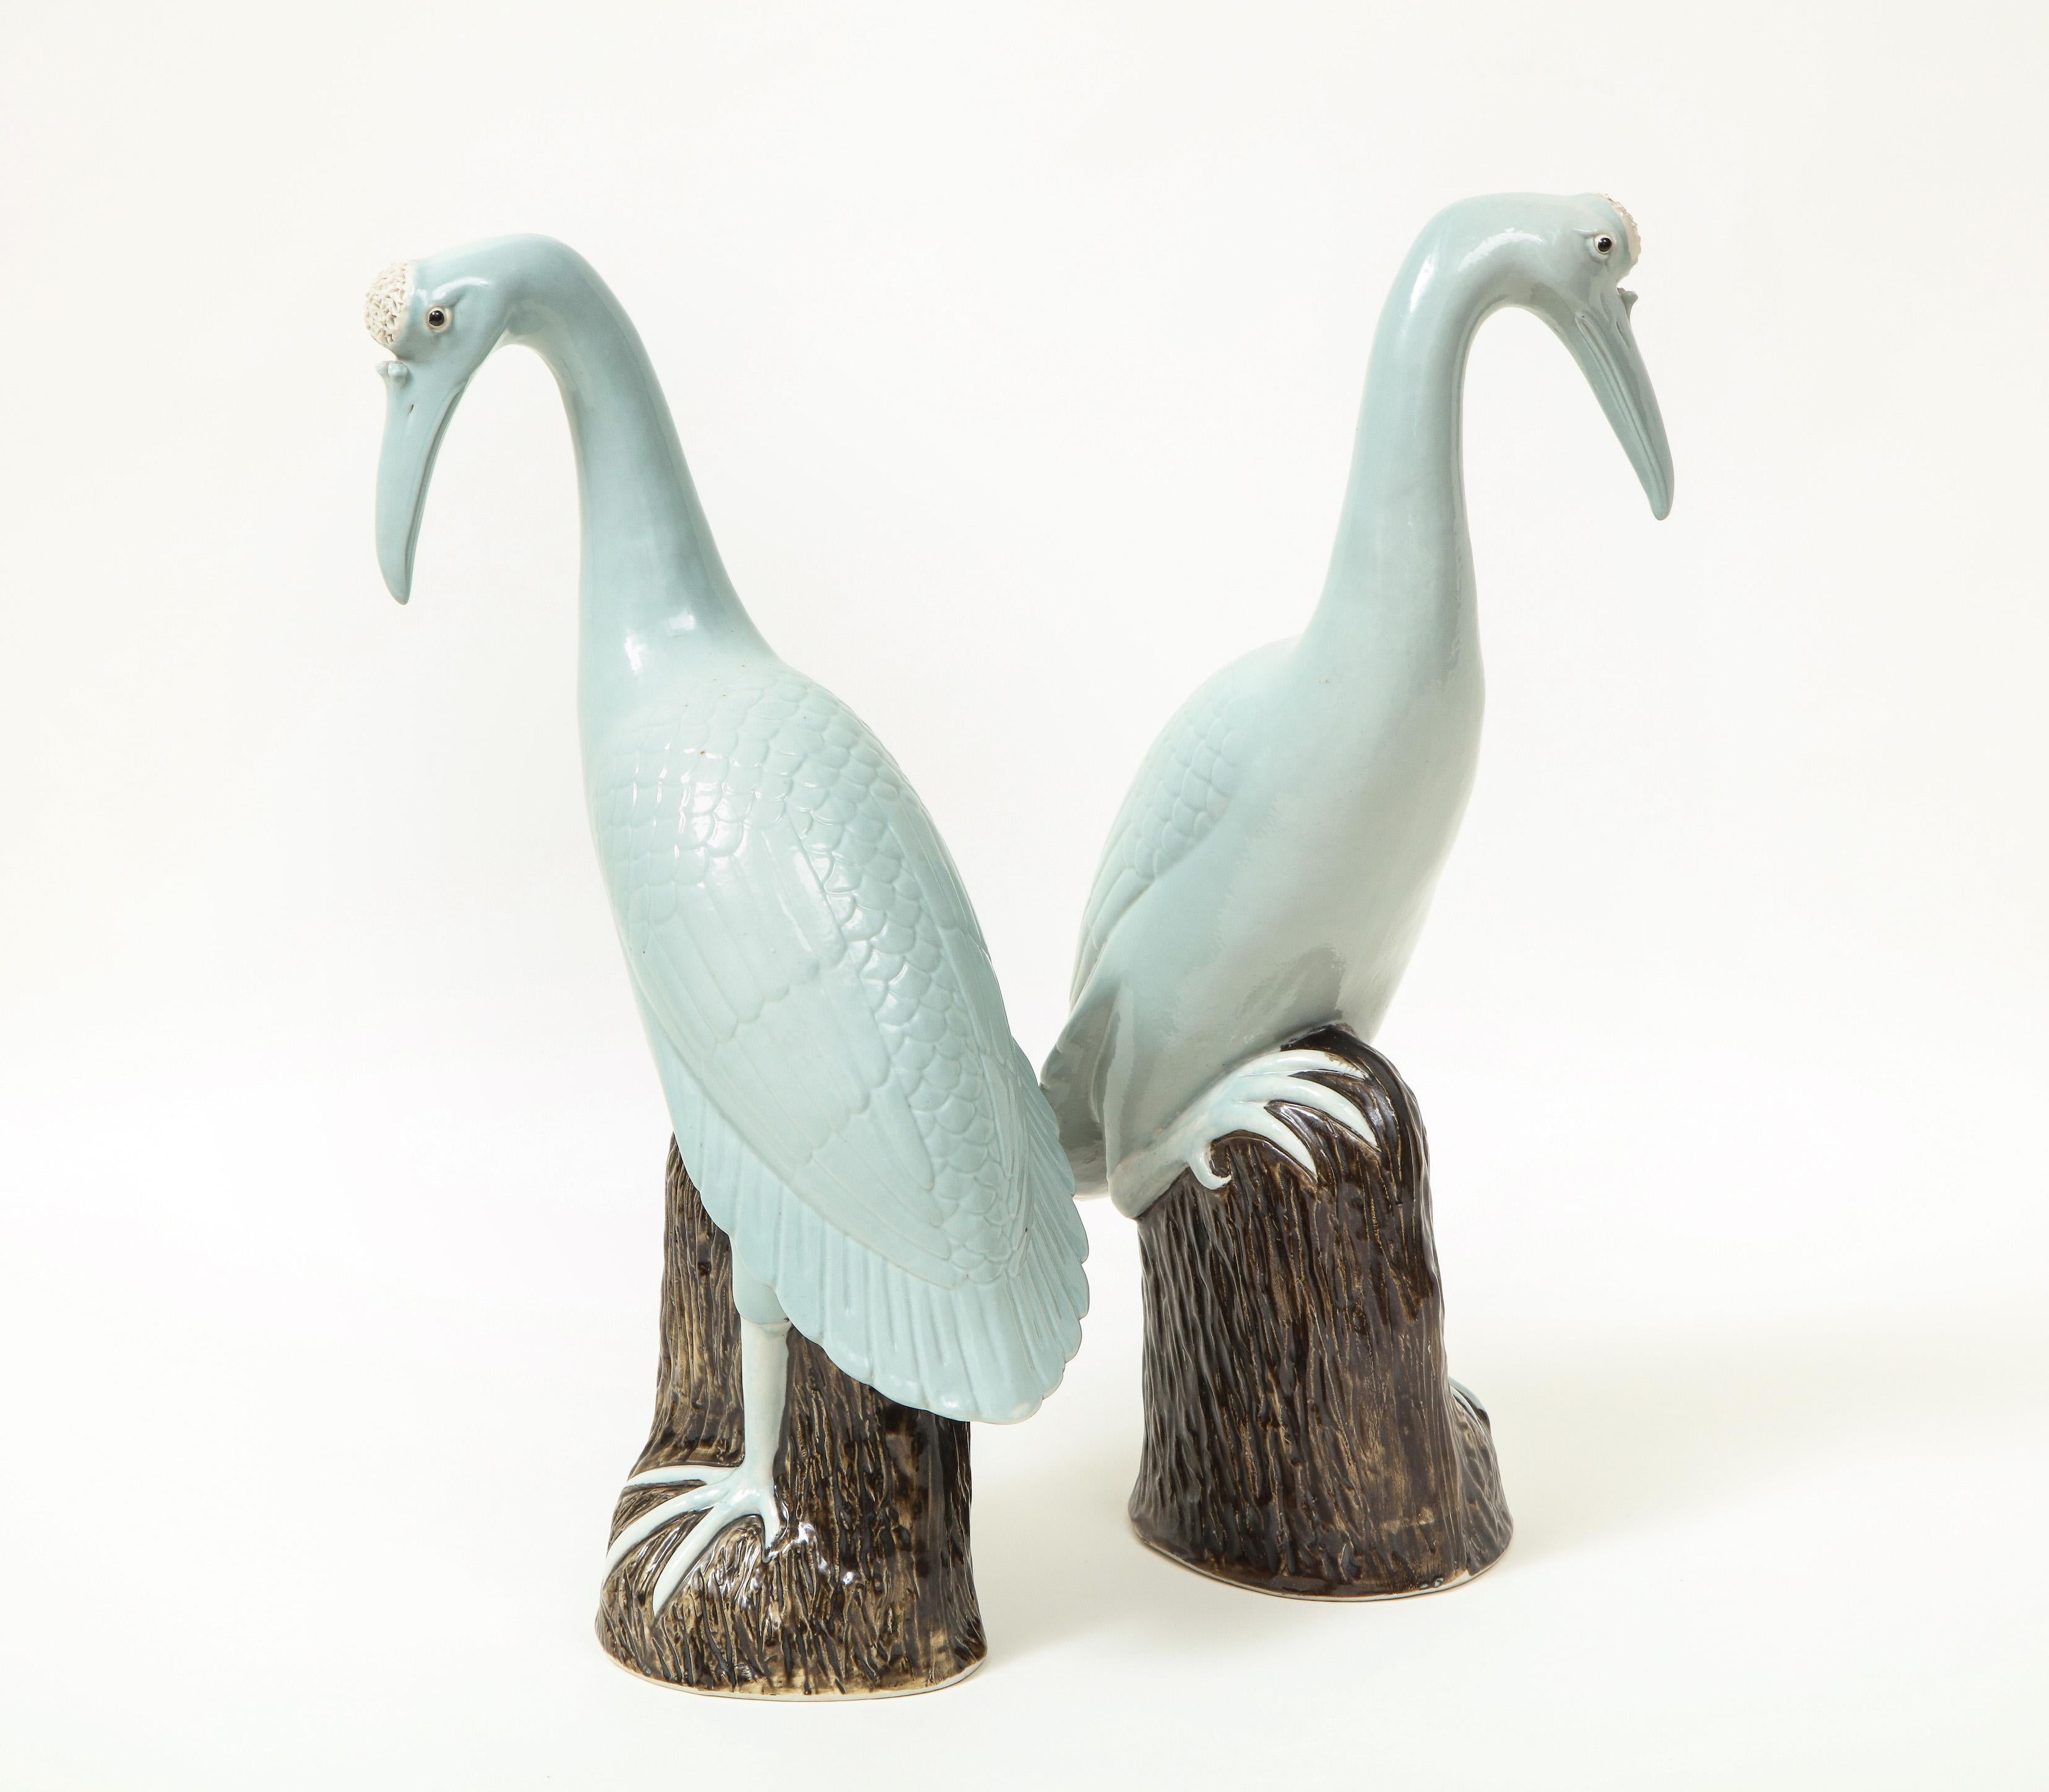 Pair of Chinese Export Porcelain Figures of Cranes 1